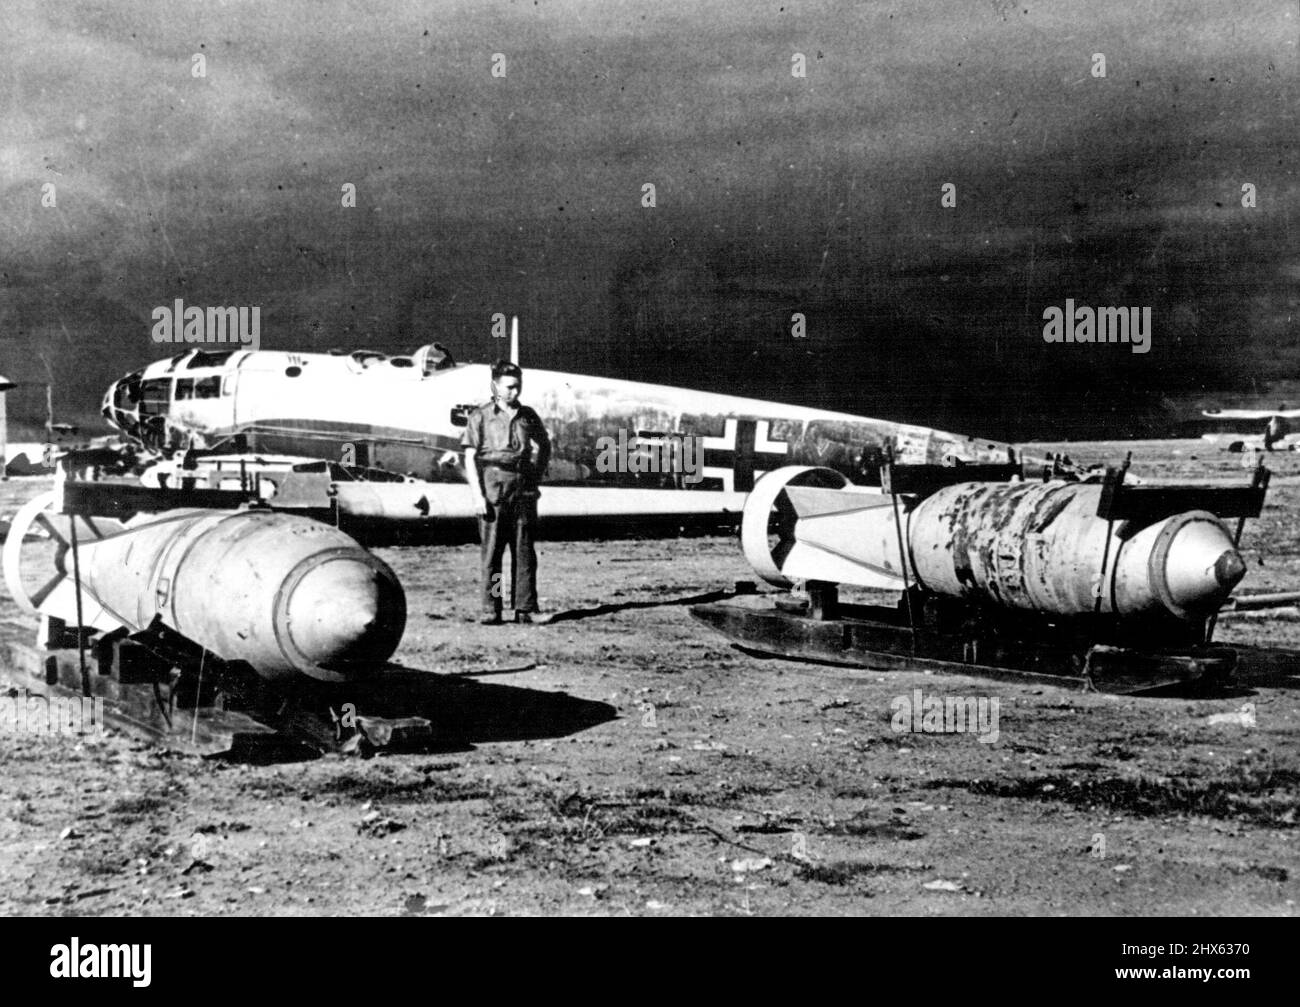 Putting The Skids Under Them — Hero ere heavy bombs on wooden skids or sleds on which, they were moved across the aerodrome at Benina, near Benghazi. They were abandoned by enemy forces in their retreat westwards. The bomber In back.-ground appears to be a Heinkel He-111. March 3, 1943. (Photo by British Air Ministry Official Photograph). Stock Photo